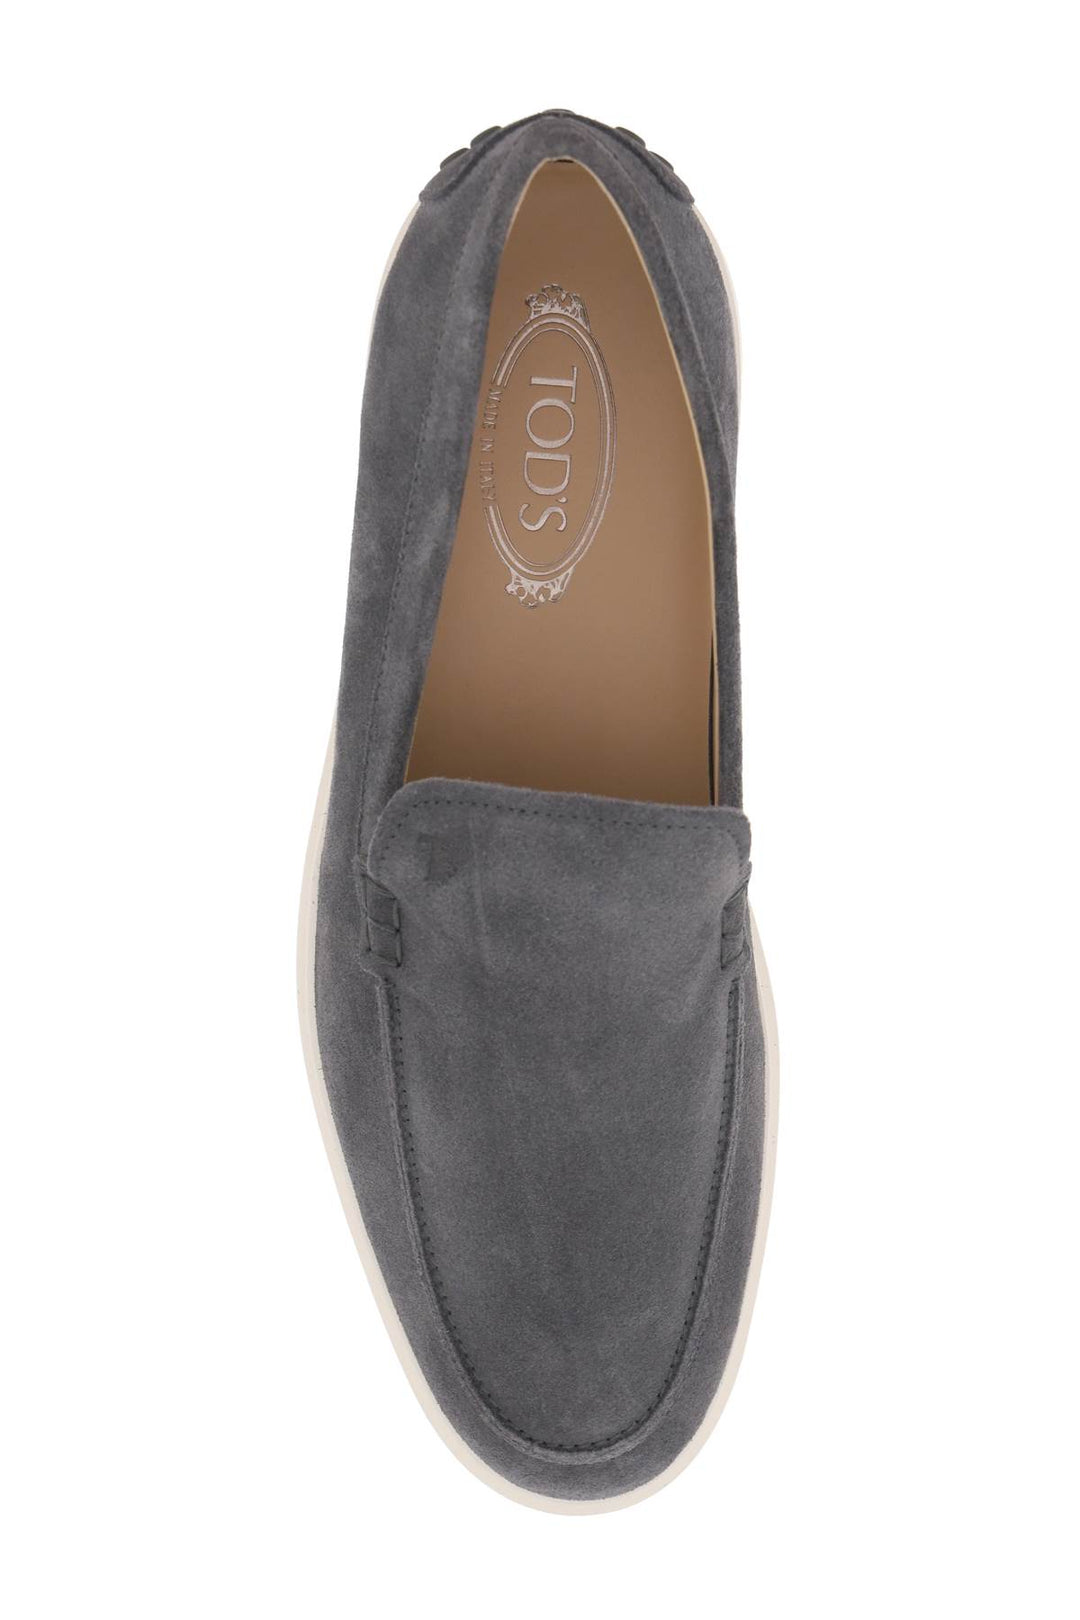 Tod's Suede Loafers   Grey